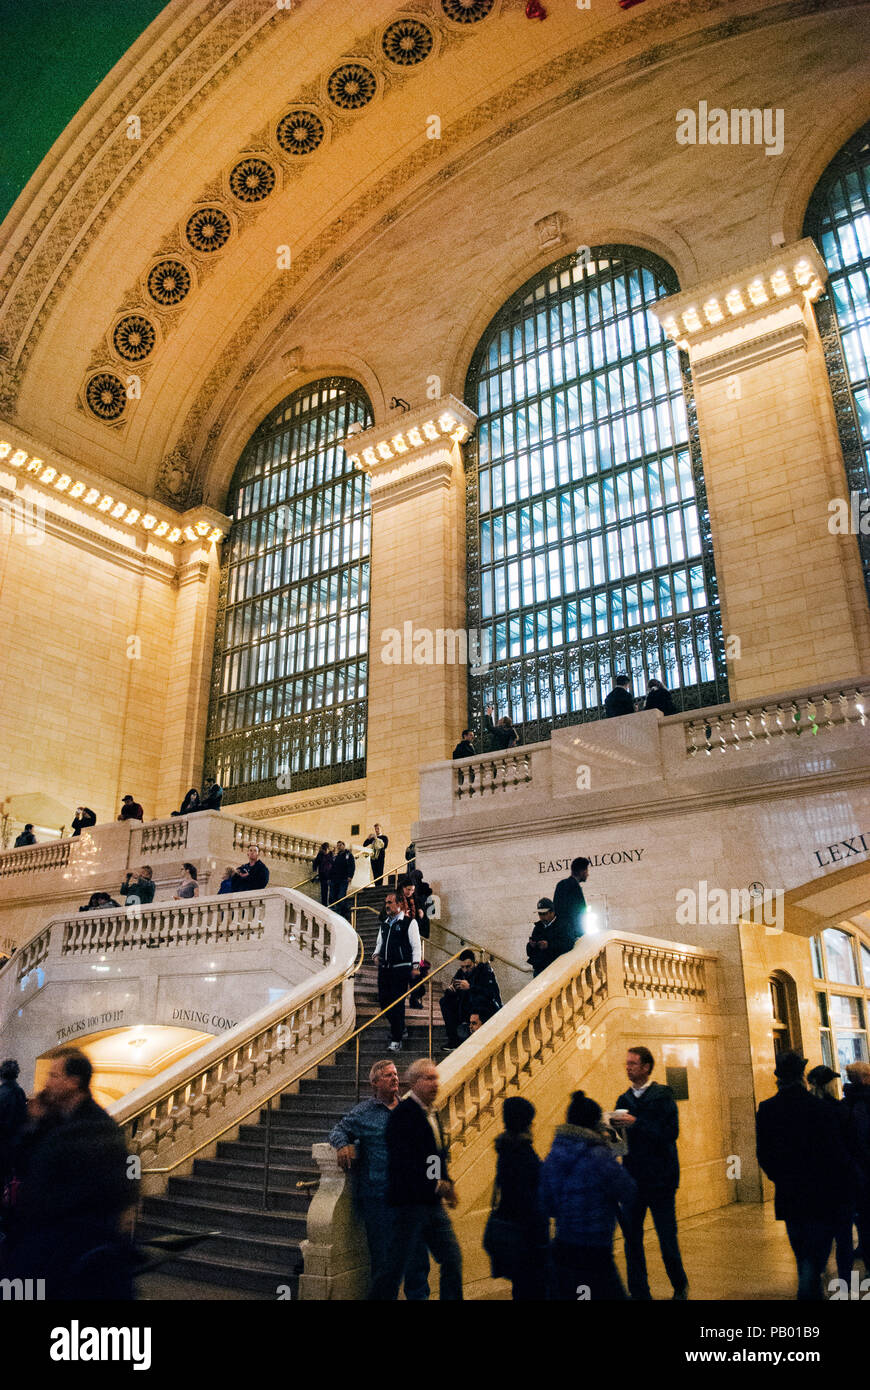 Grand Central Terminal, New York, USA Banque D'Images